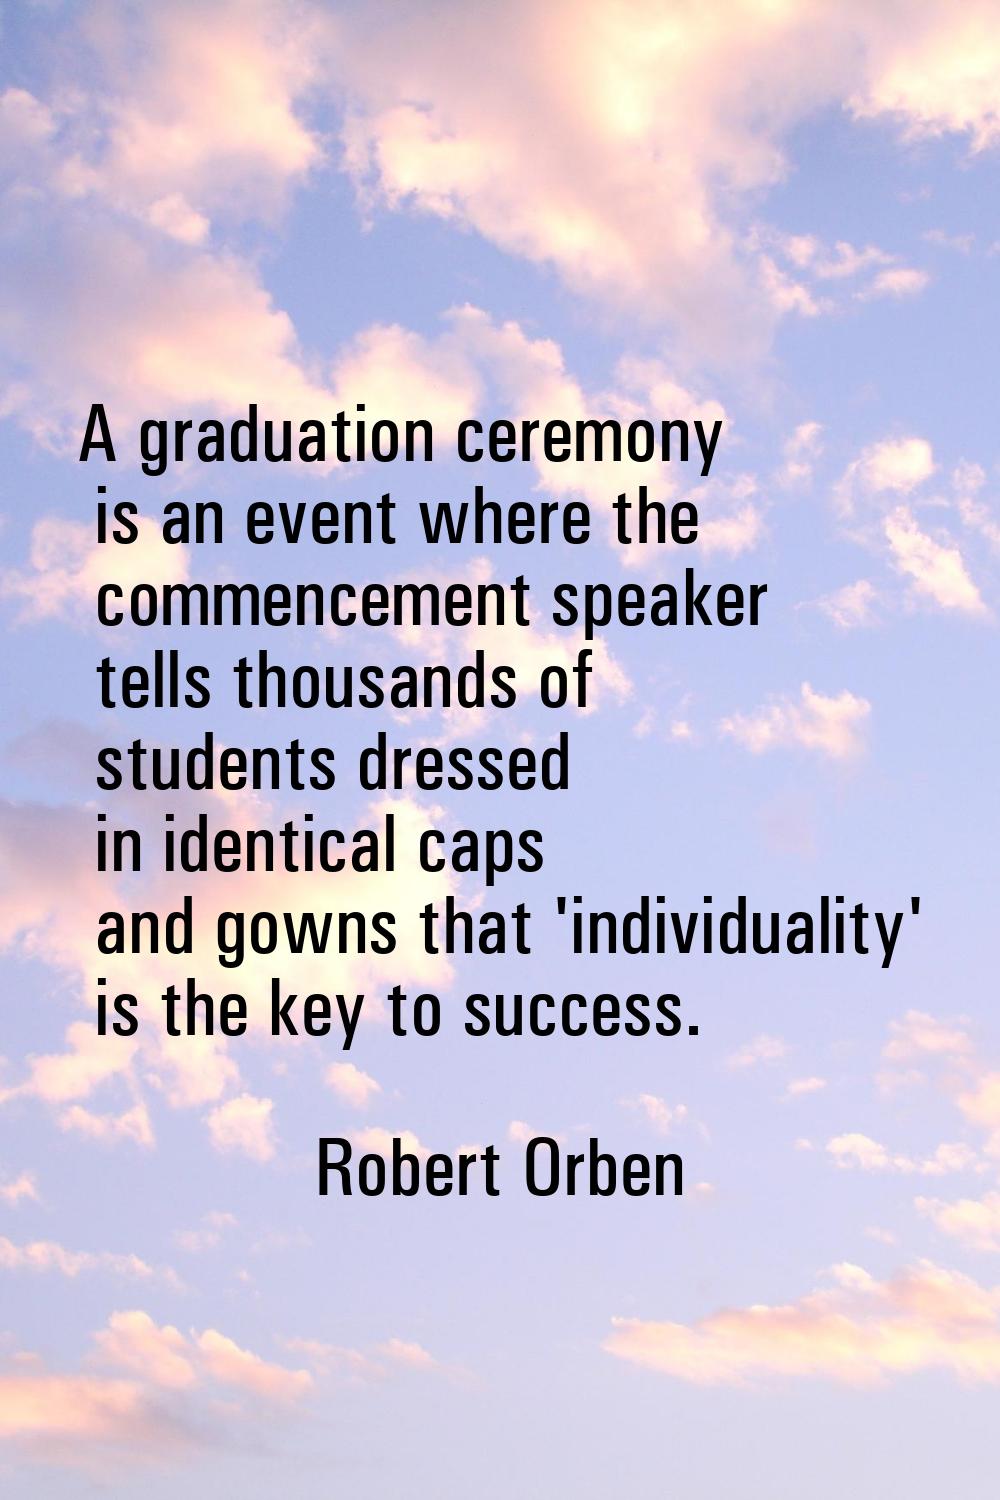 A graduation ceremony is an event where the commencement speaker tells thousands of students dresse